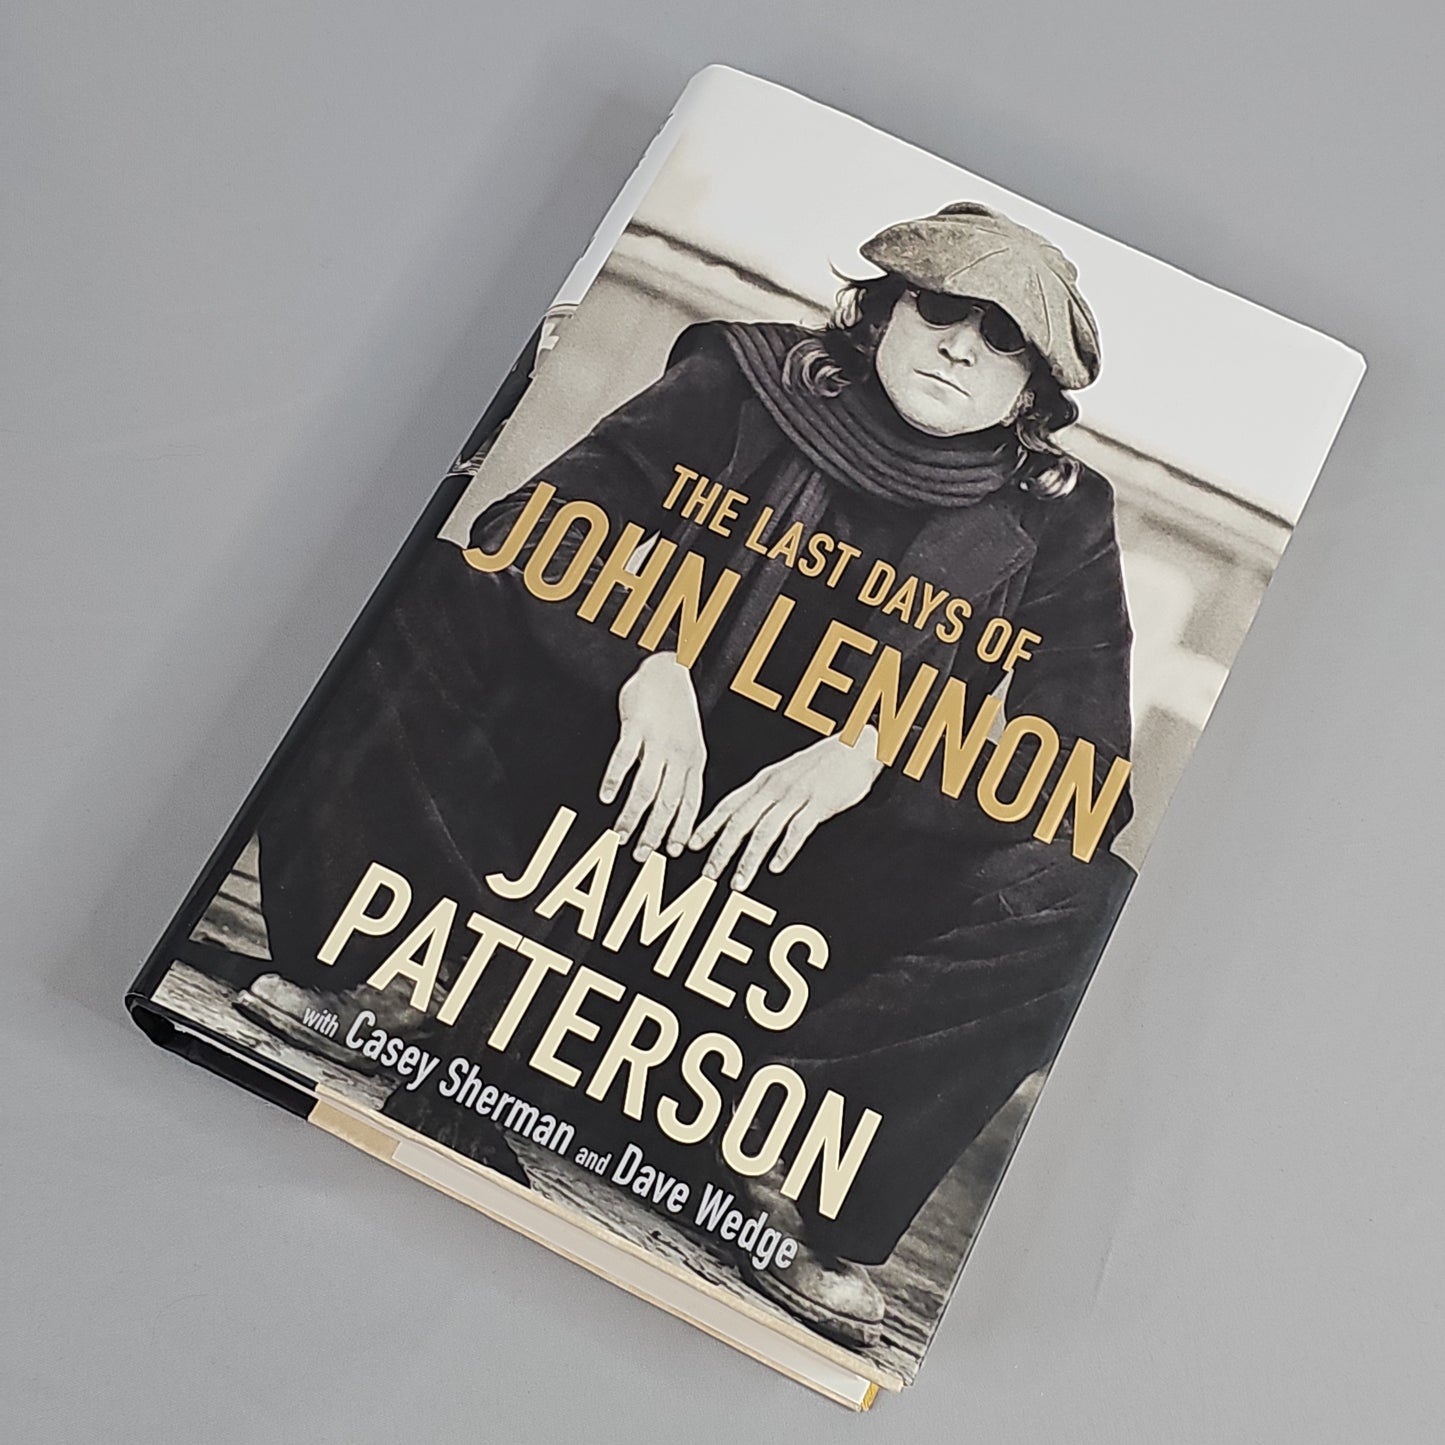 THE LAST DAYS OF JOHN LENNON by James Patterson Book Hardback (New)